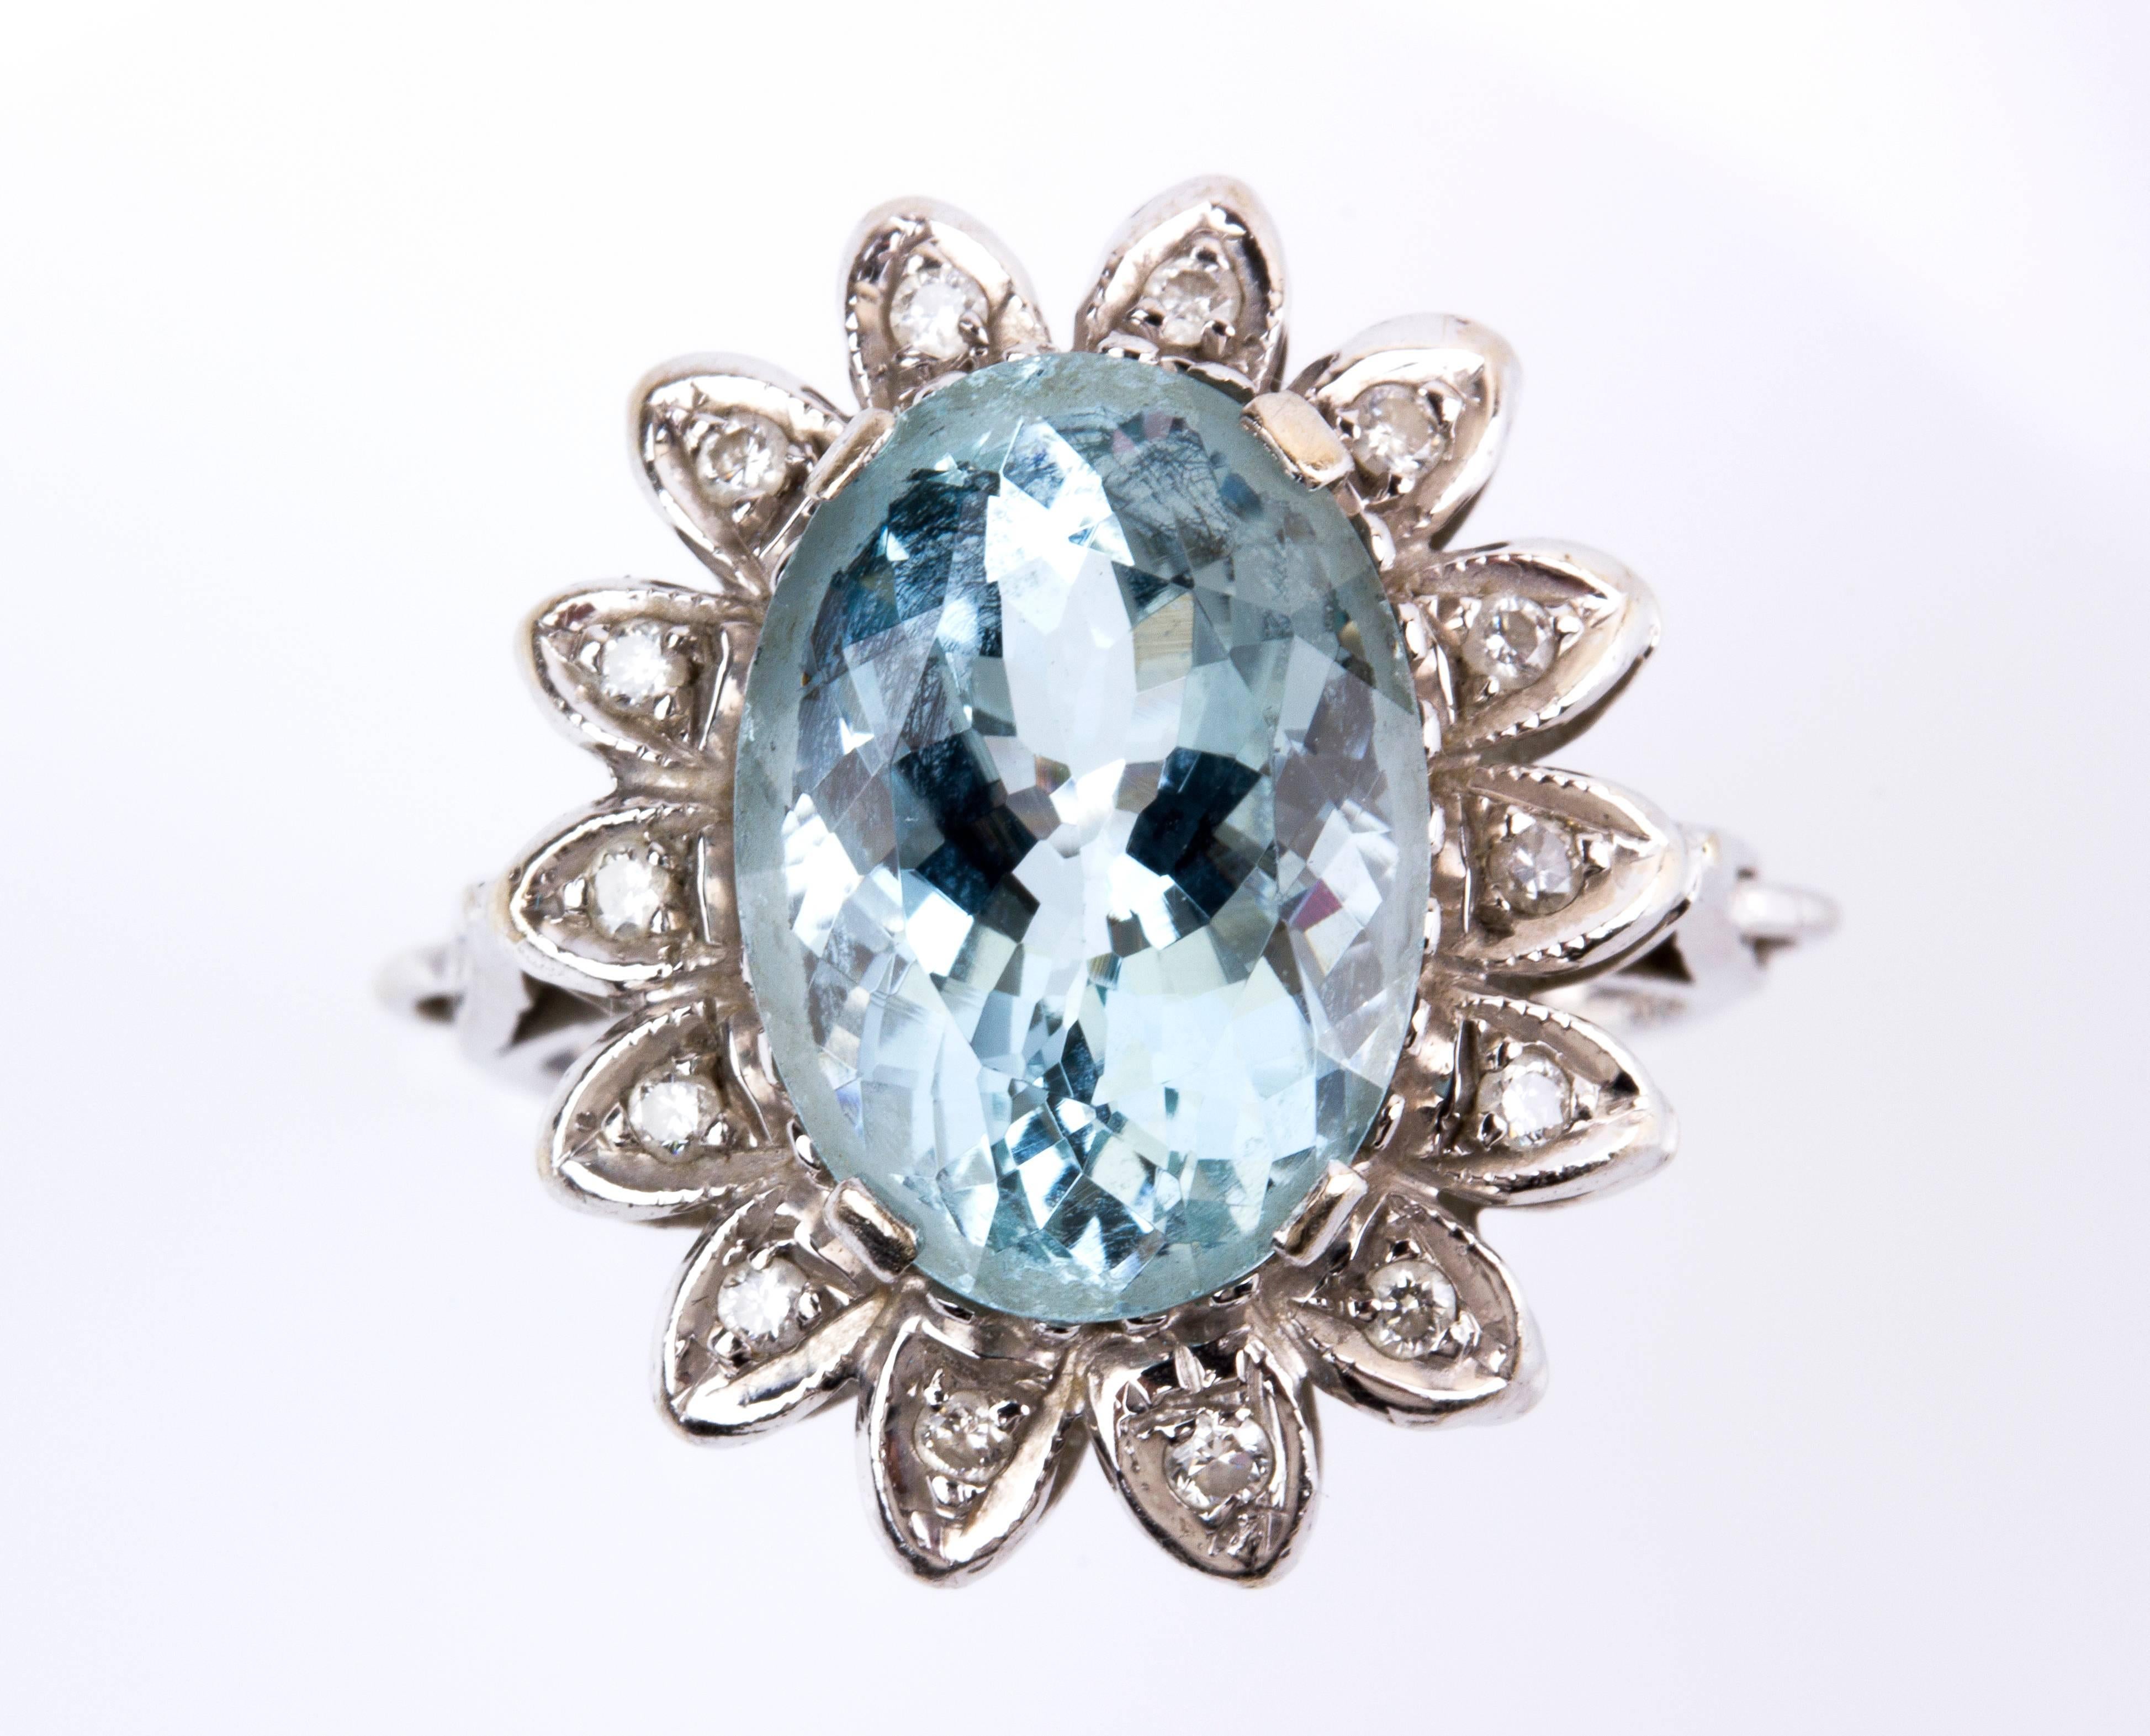 Shaped as a flower, set 5.80 ct aquamarine, petals embellished with diamond weighing 0.20 ct, VS/SI clarity, G color. Size US 7.5 
